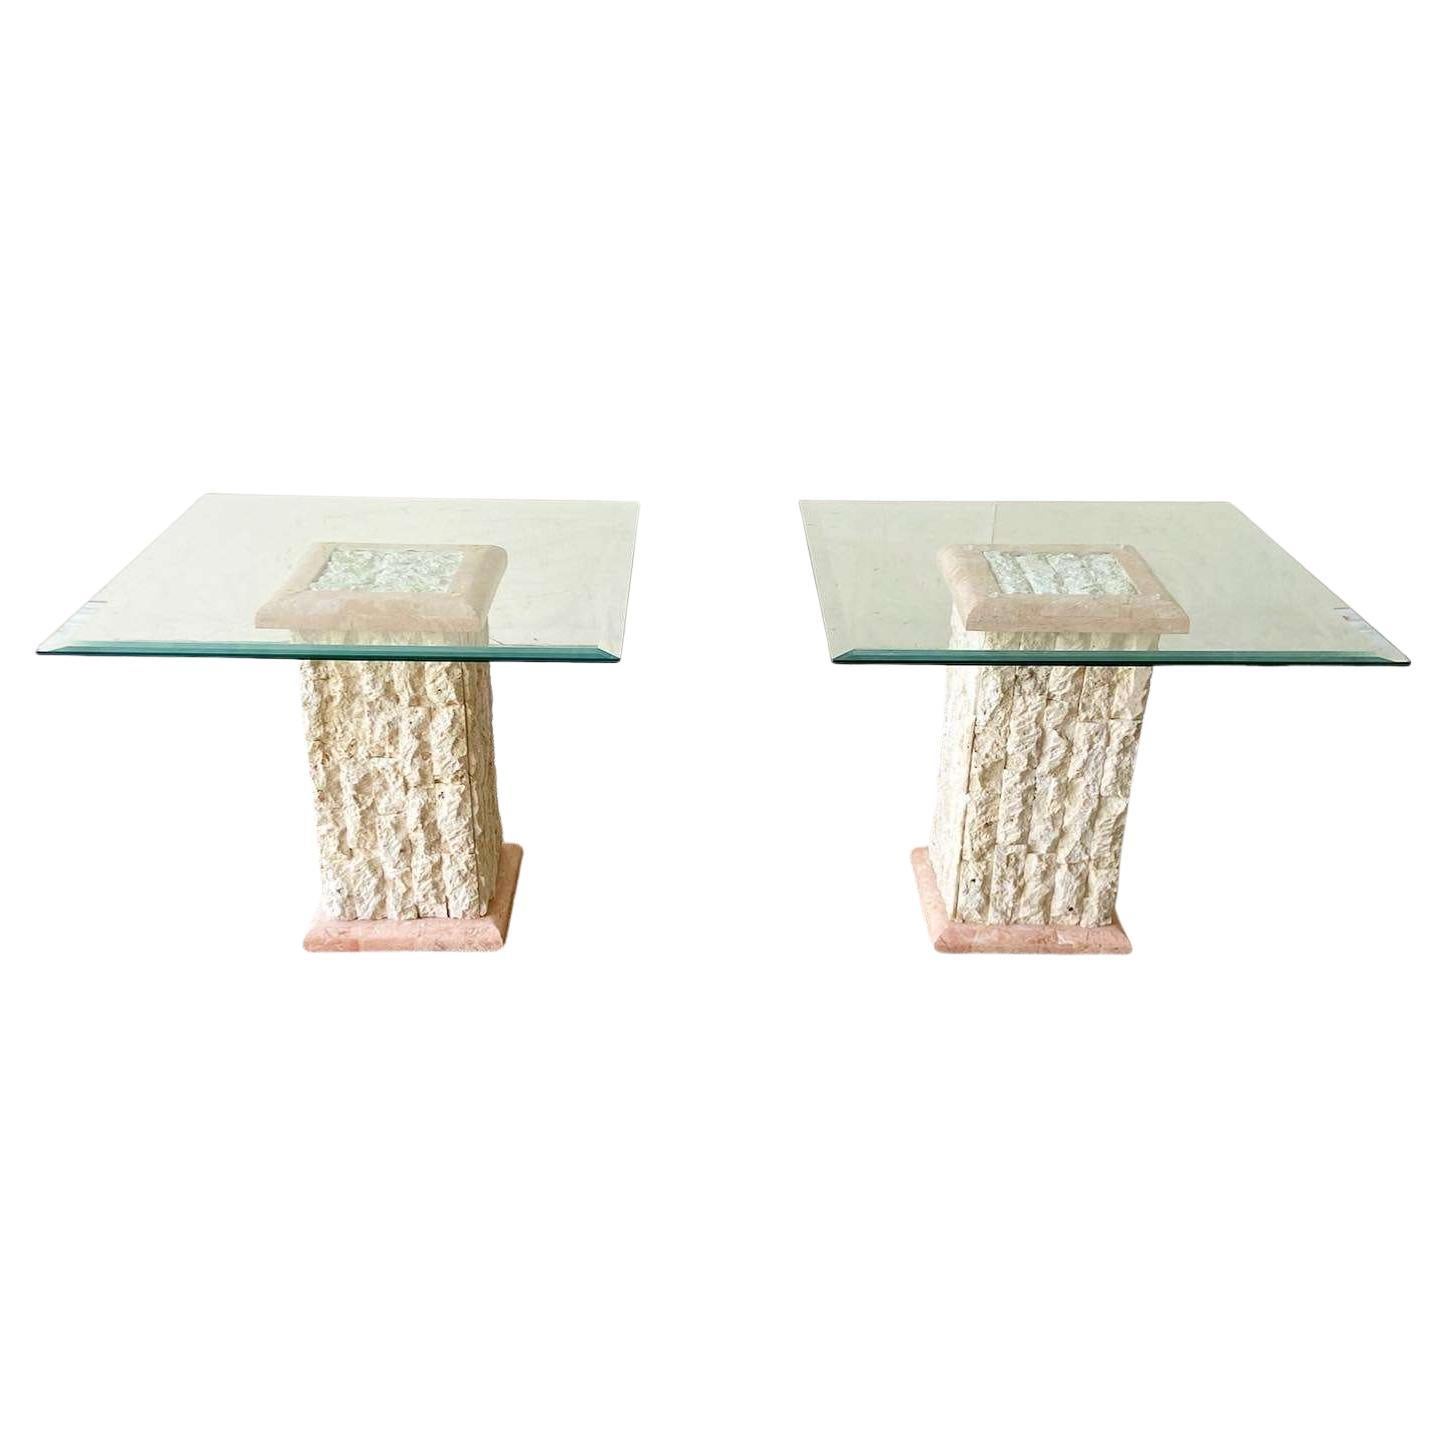 1990s Postmodern Tessellated Stone Glass Top Side Tables - a Pair For Sale